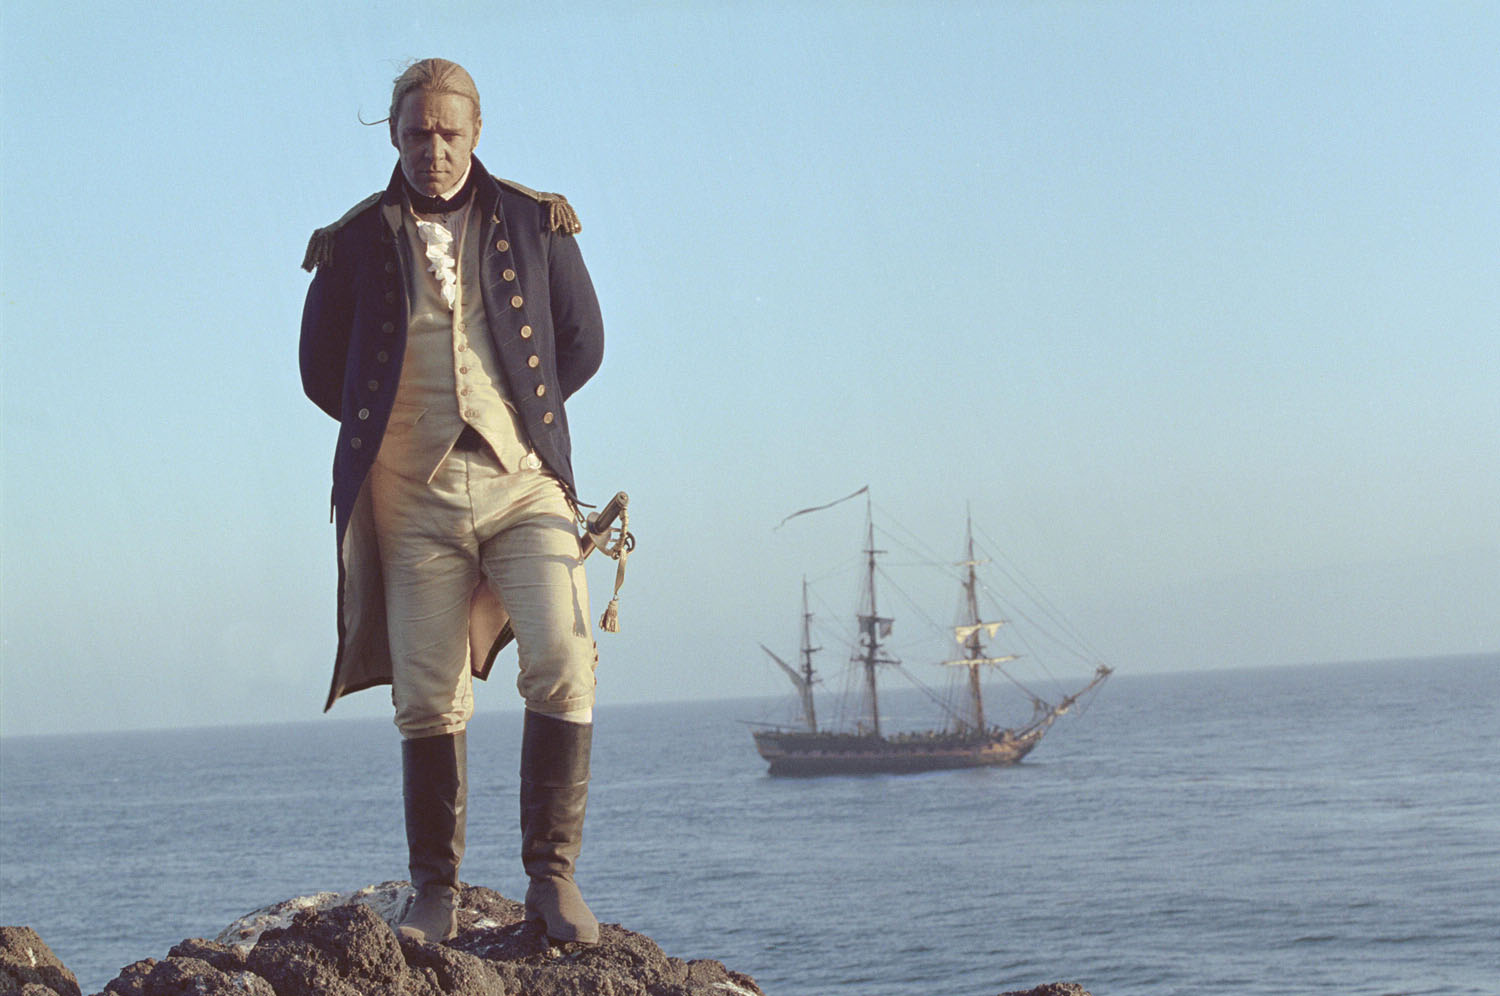 2003 Master And Commander: The Far Side Of The World